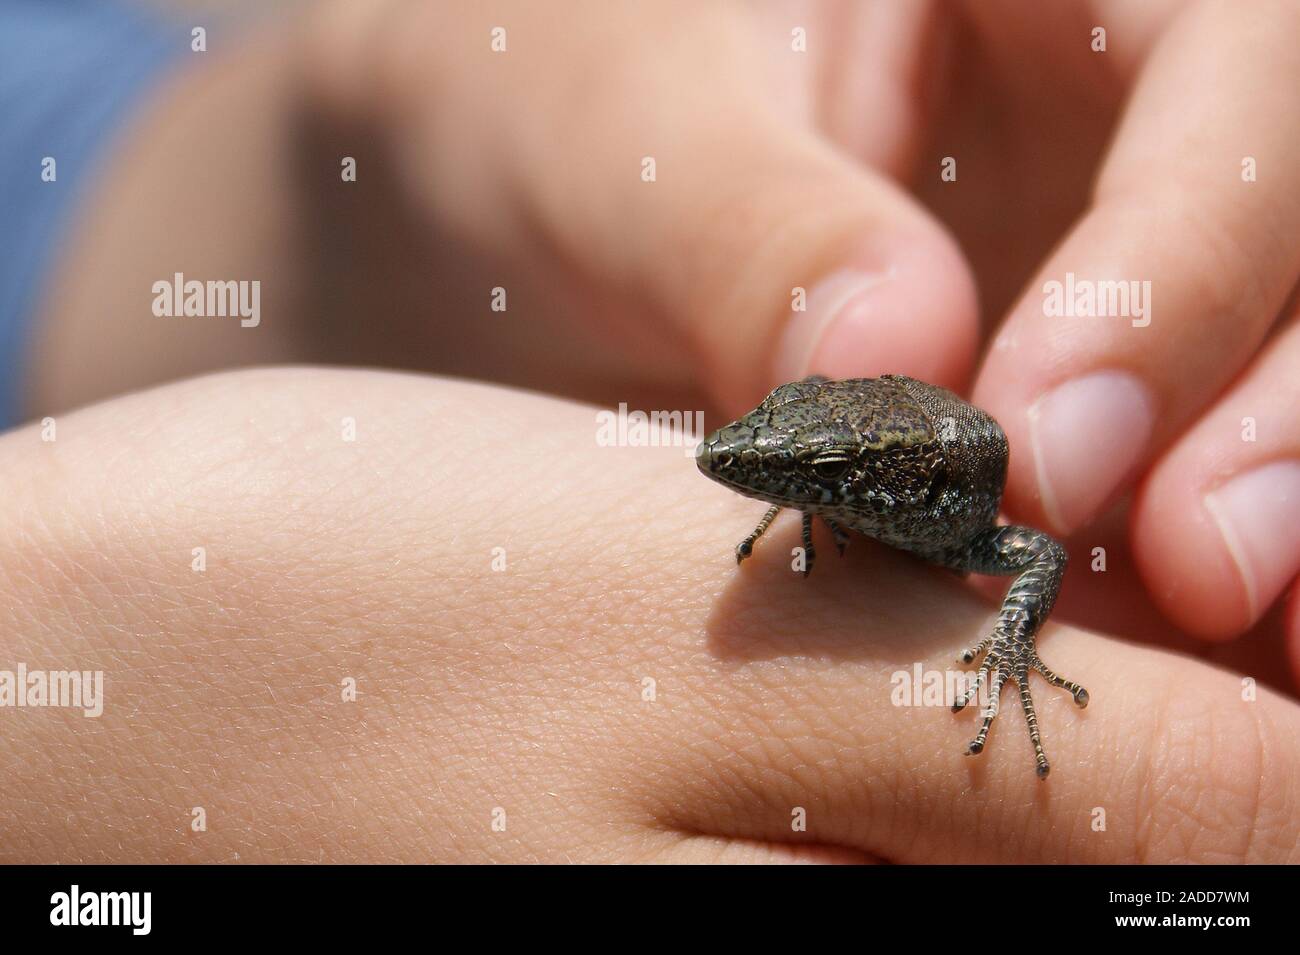 The lizard sits on the arm. Stock Photo